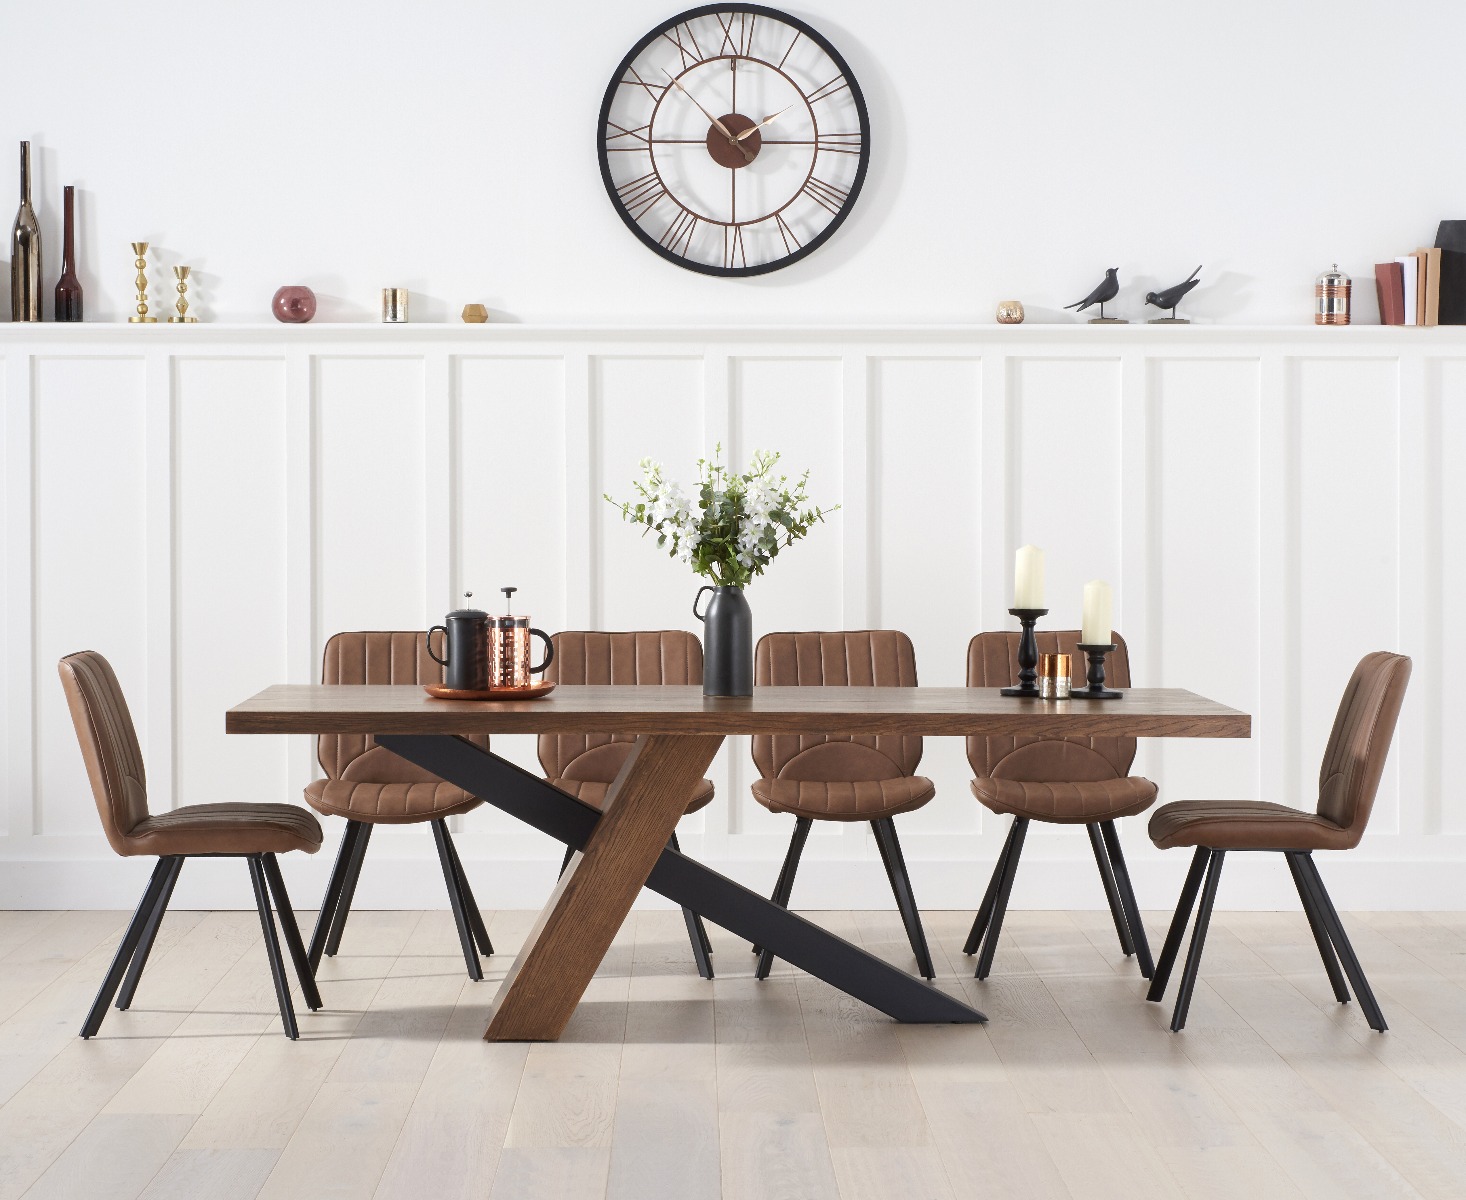 Chateau 225cm Black Leg Industrial Dining Table With 8 Brown Hendrick Faux Leather Dining Chairs